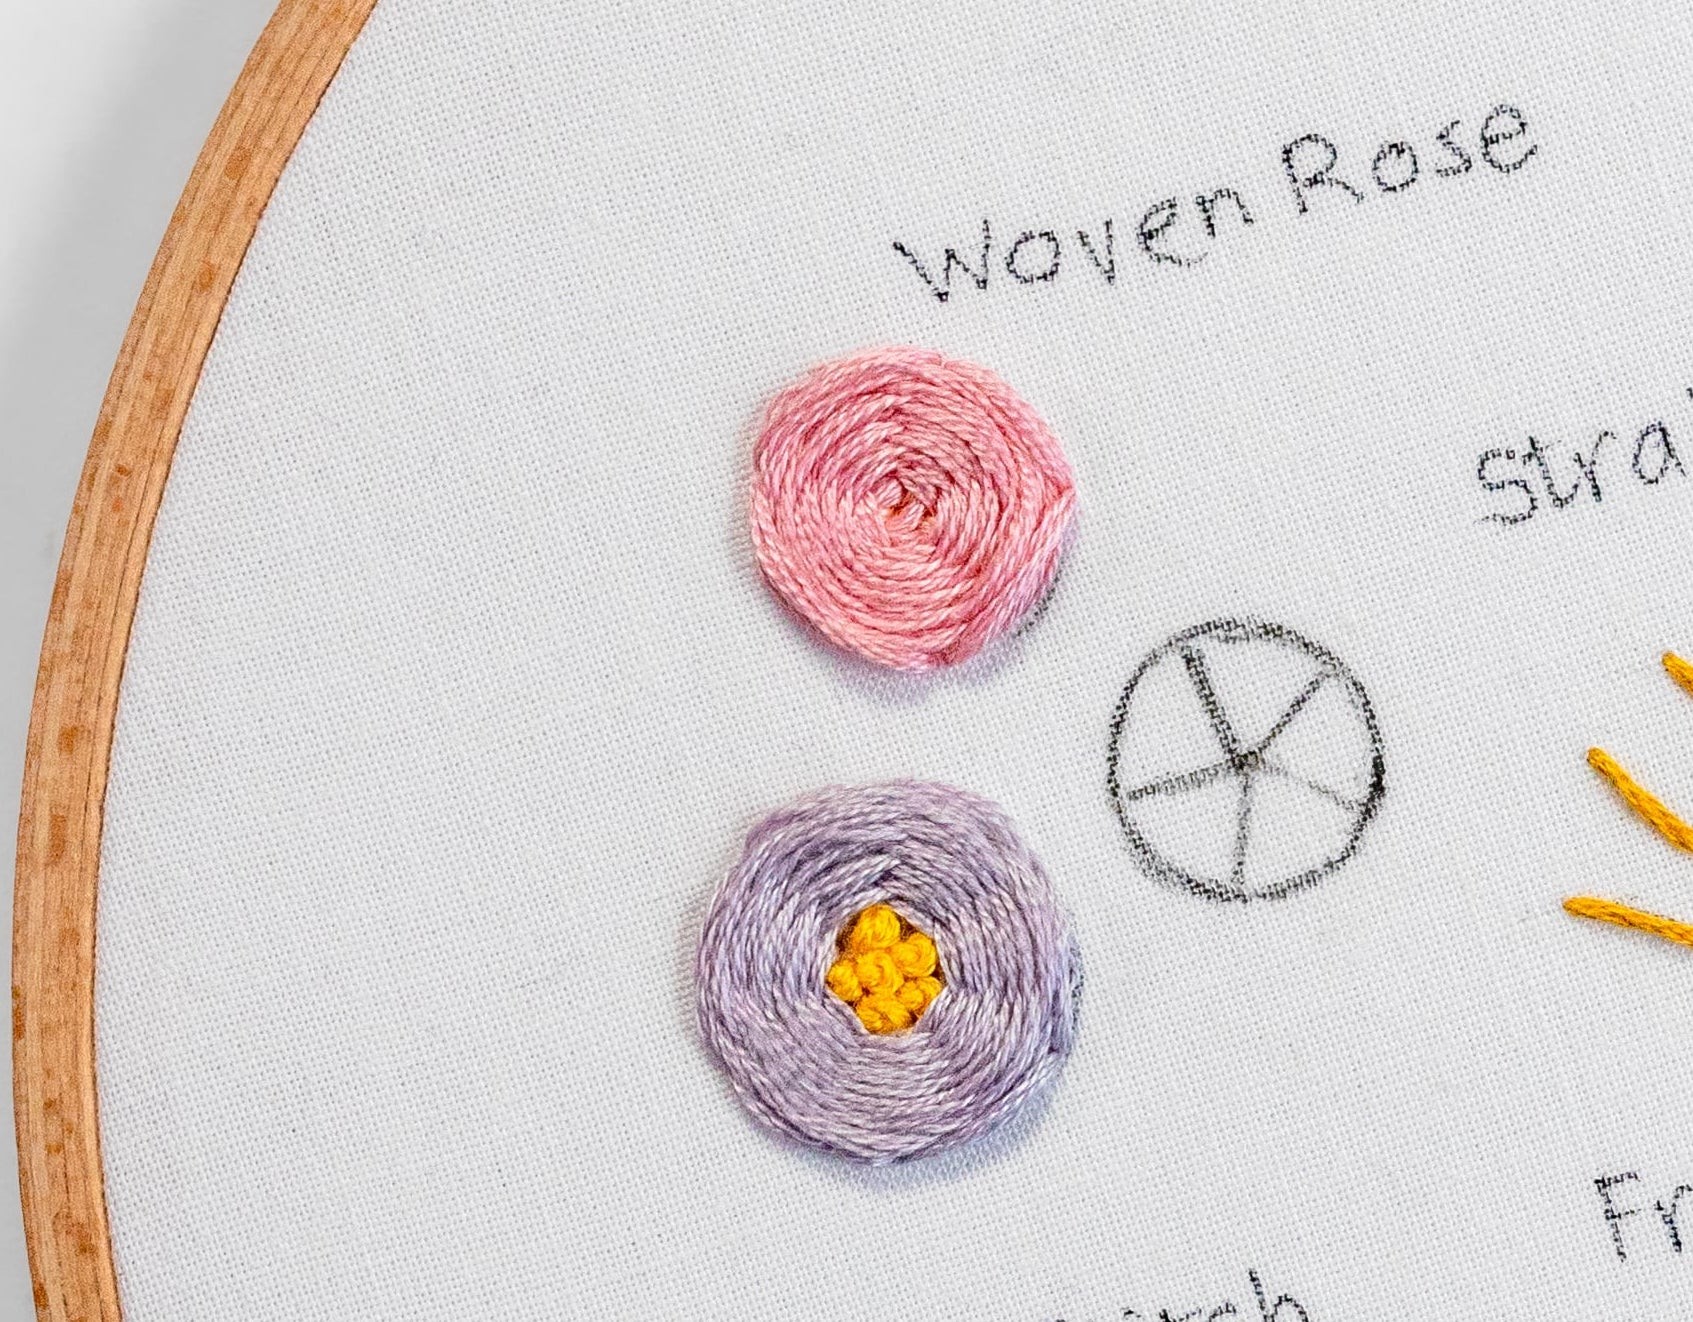 Woven Roses lie around the rest of the embroidery stitches in an embroidery sampler..